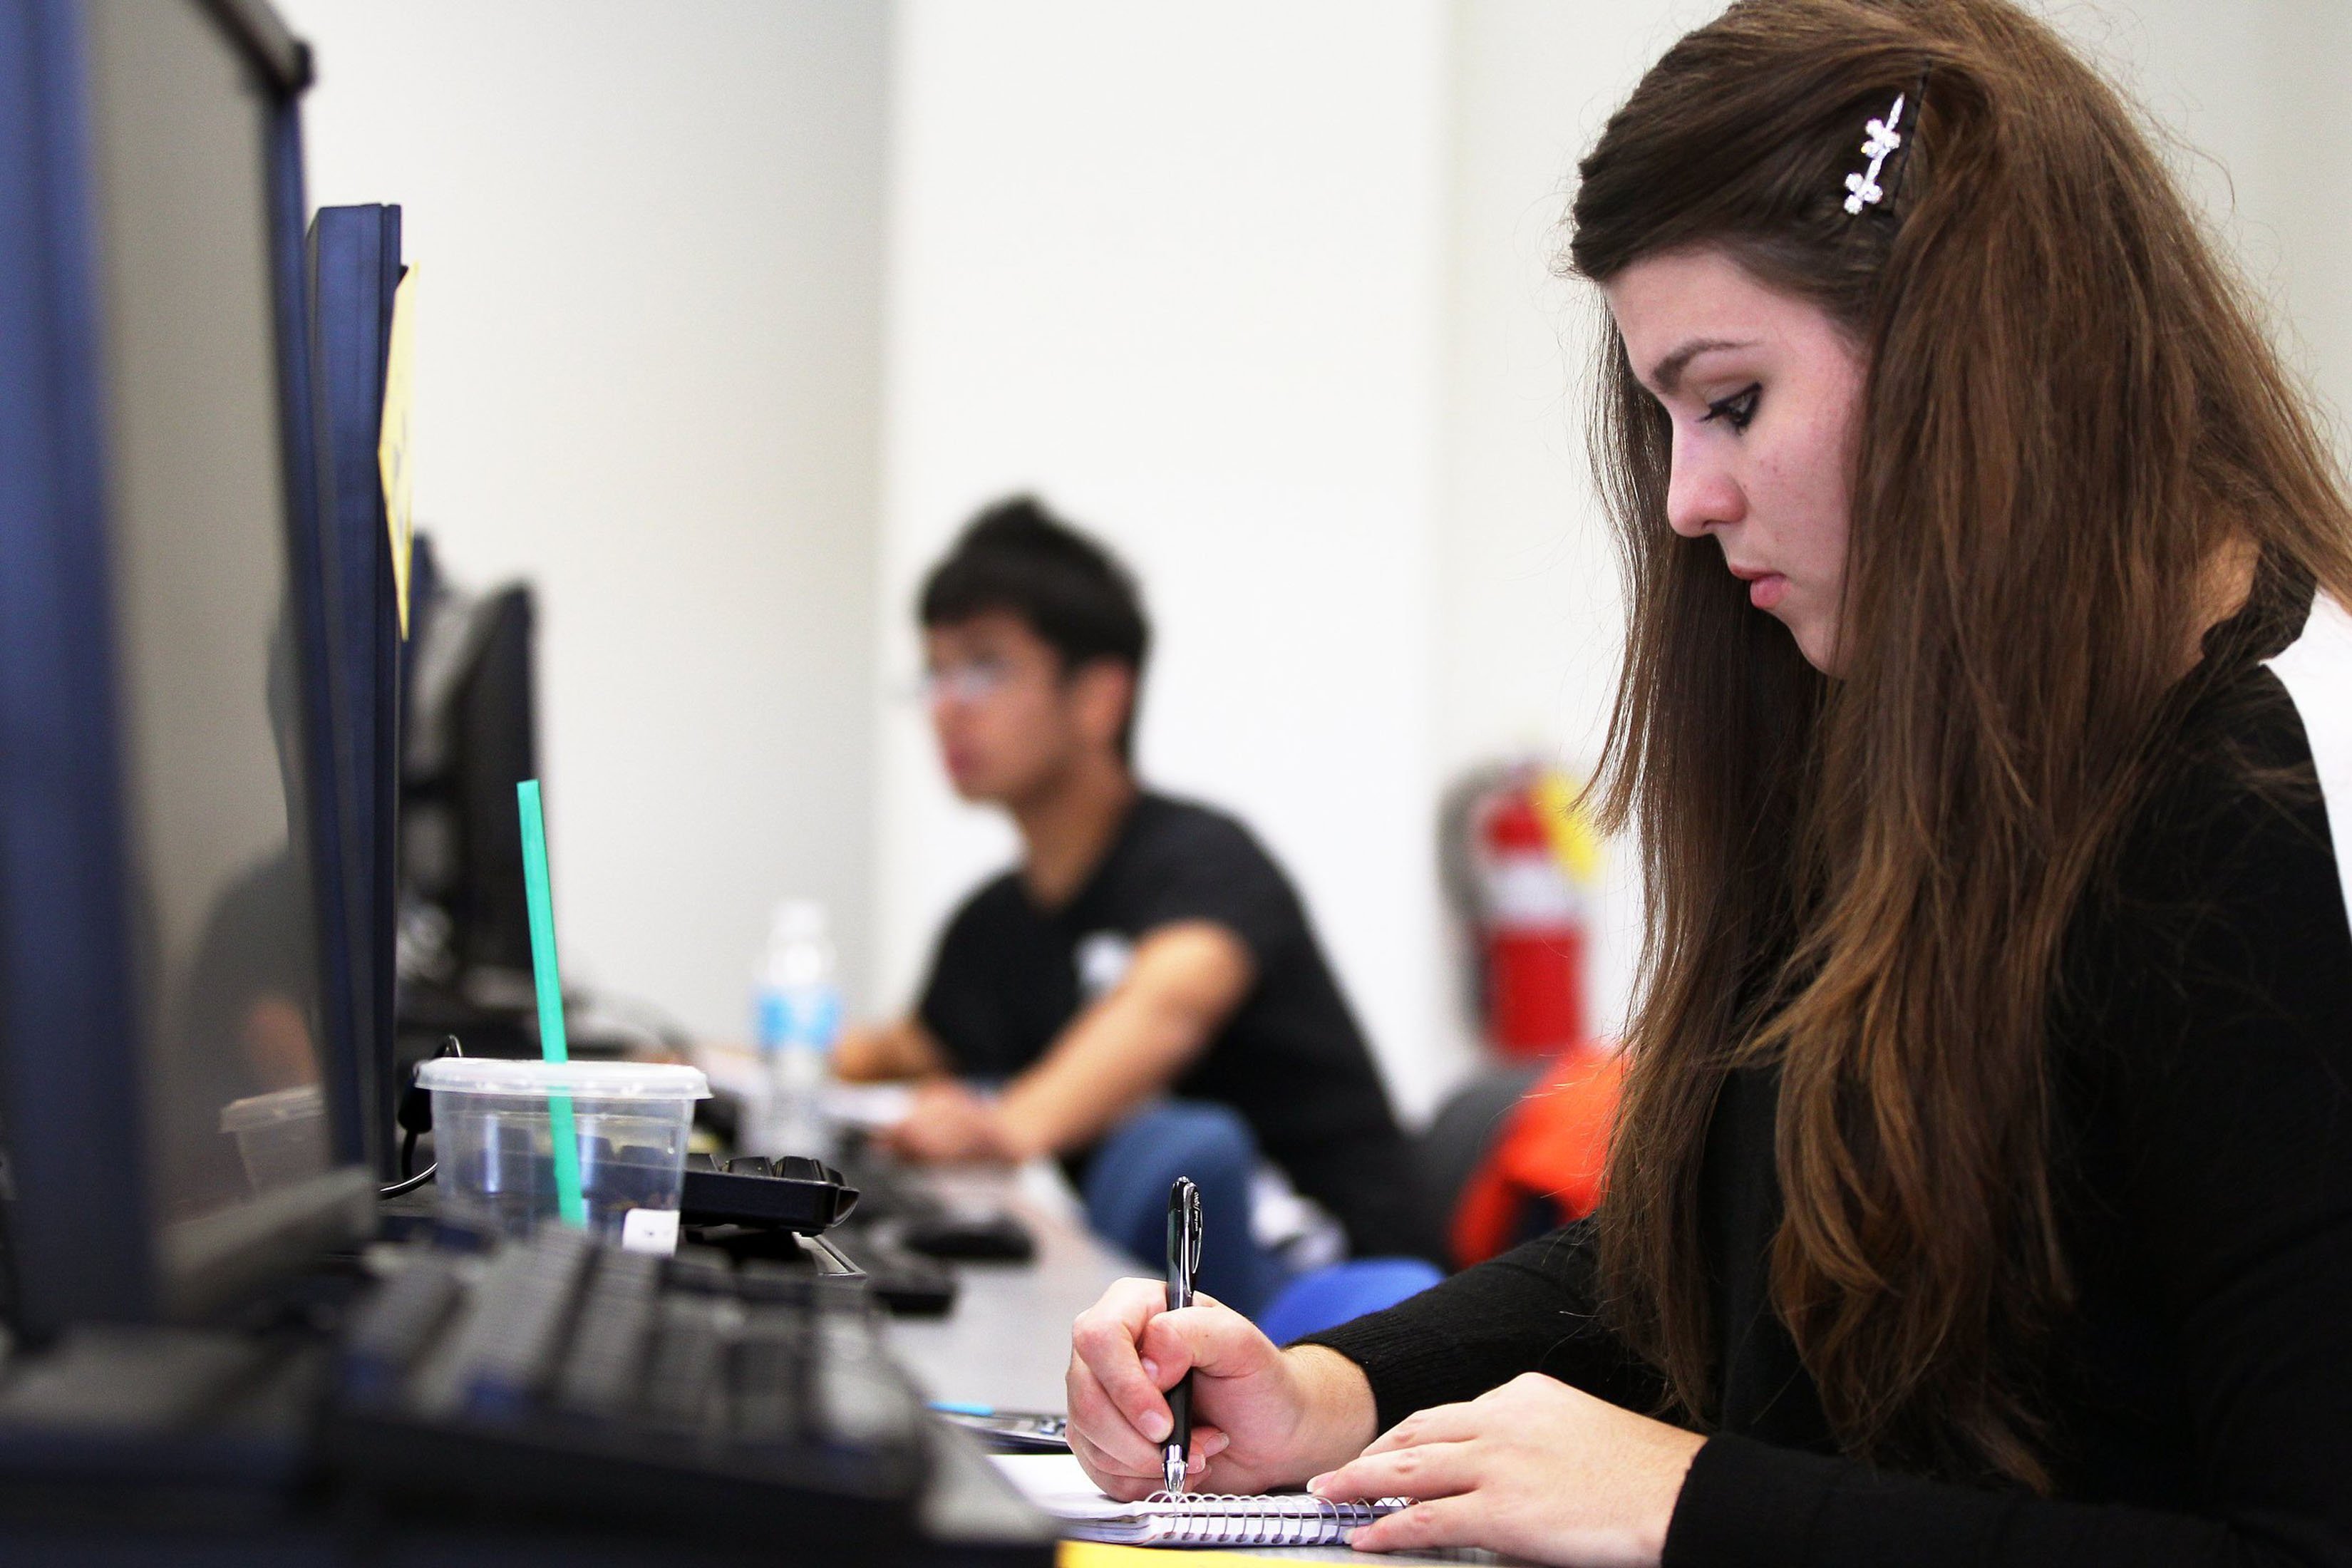 A young, female student writes in her notebook in front of a computer monitor and keyboard with a Starbucks drink near her. Another male student sits in the background (blurred).